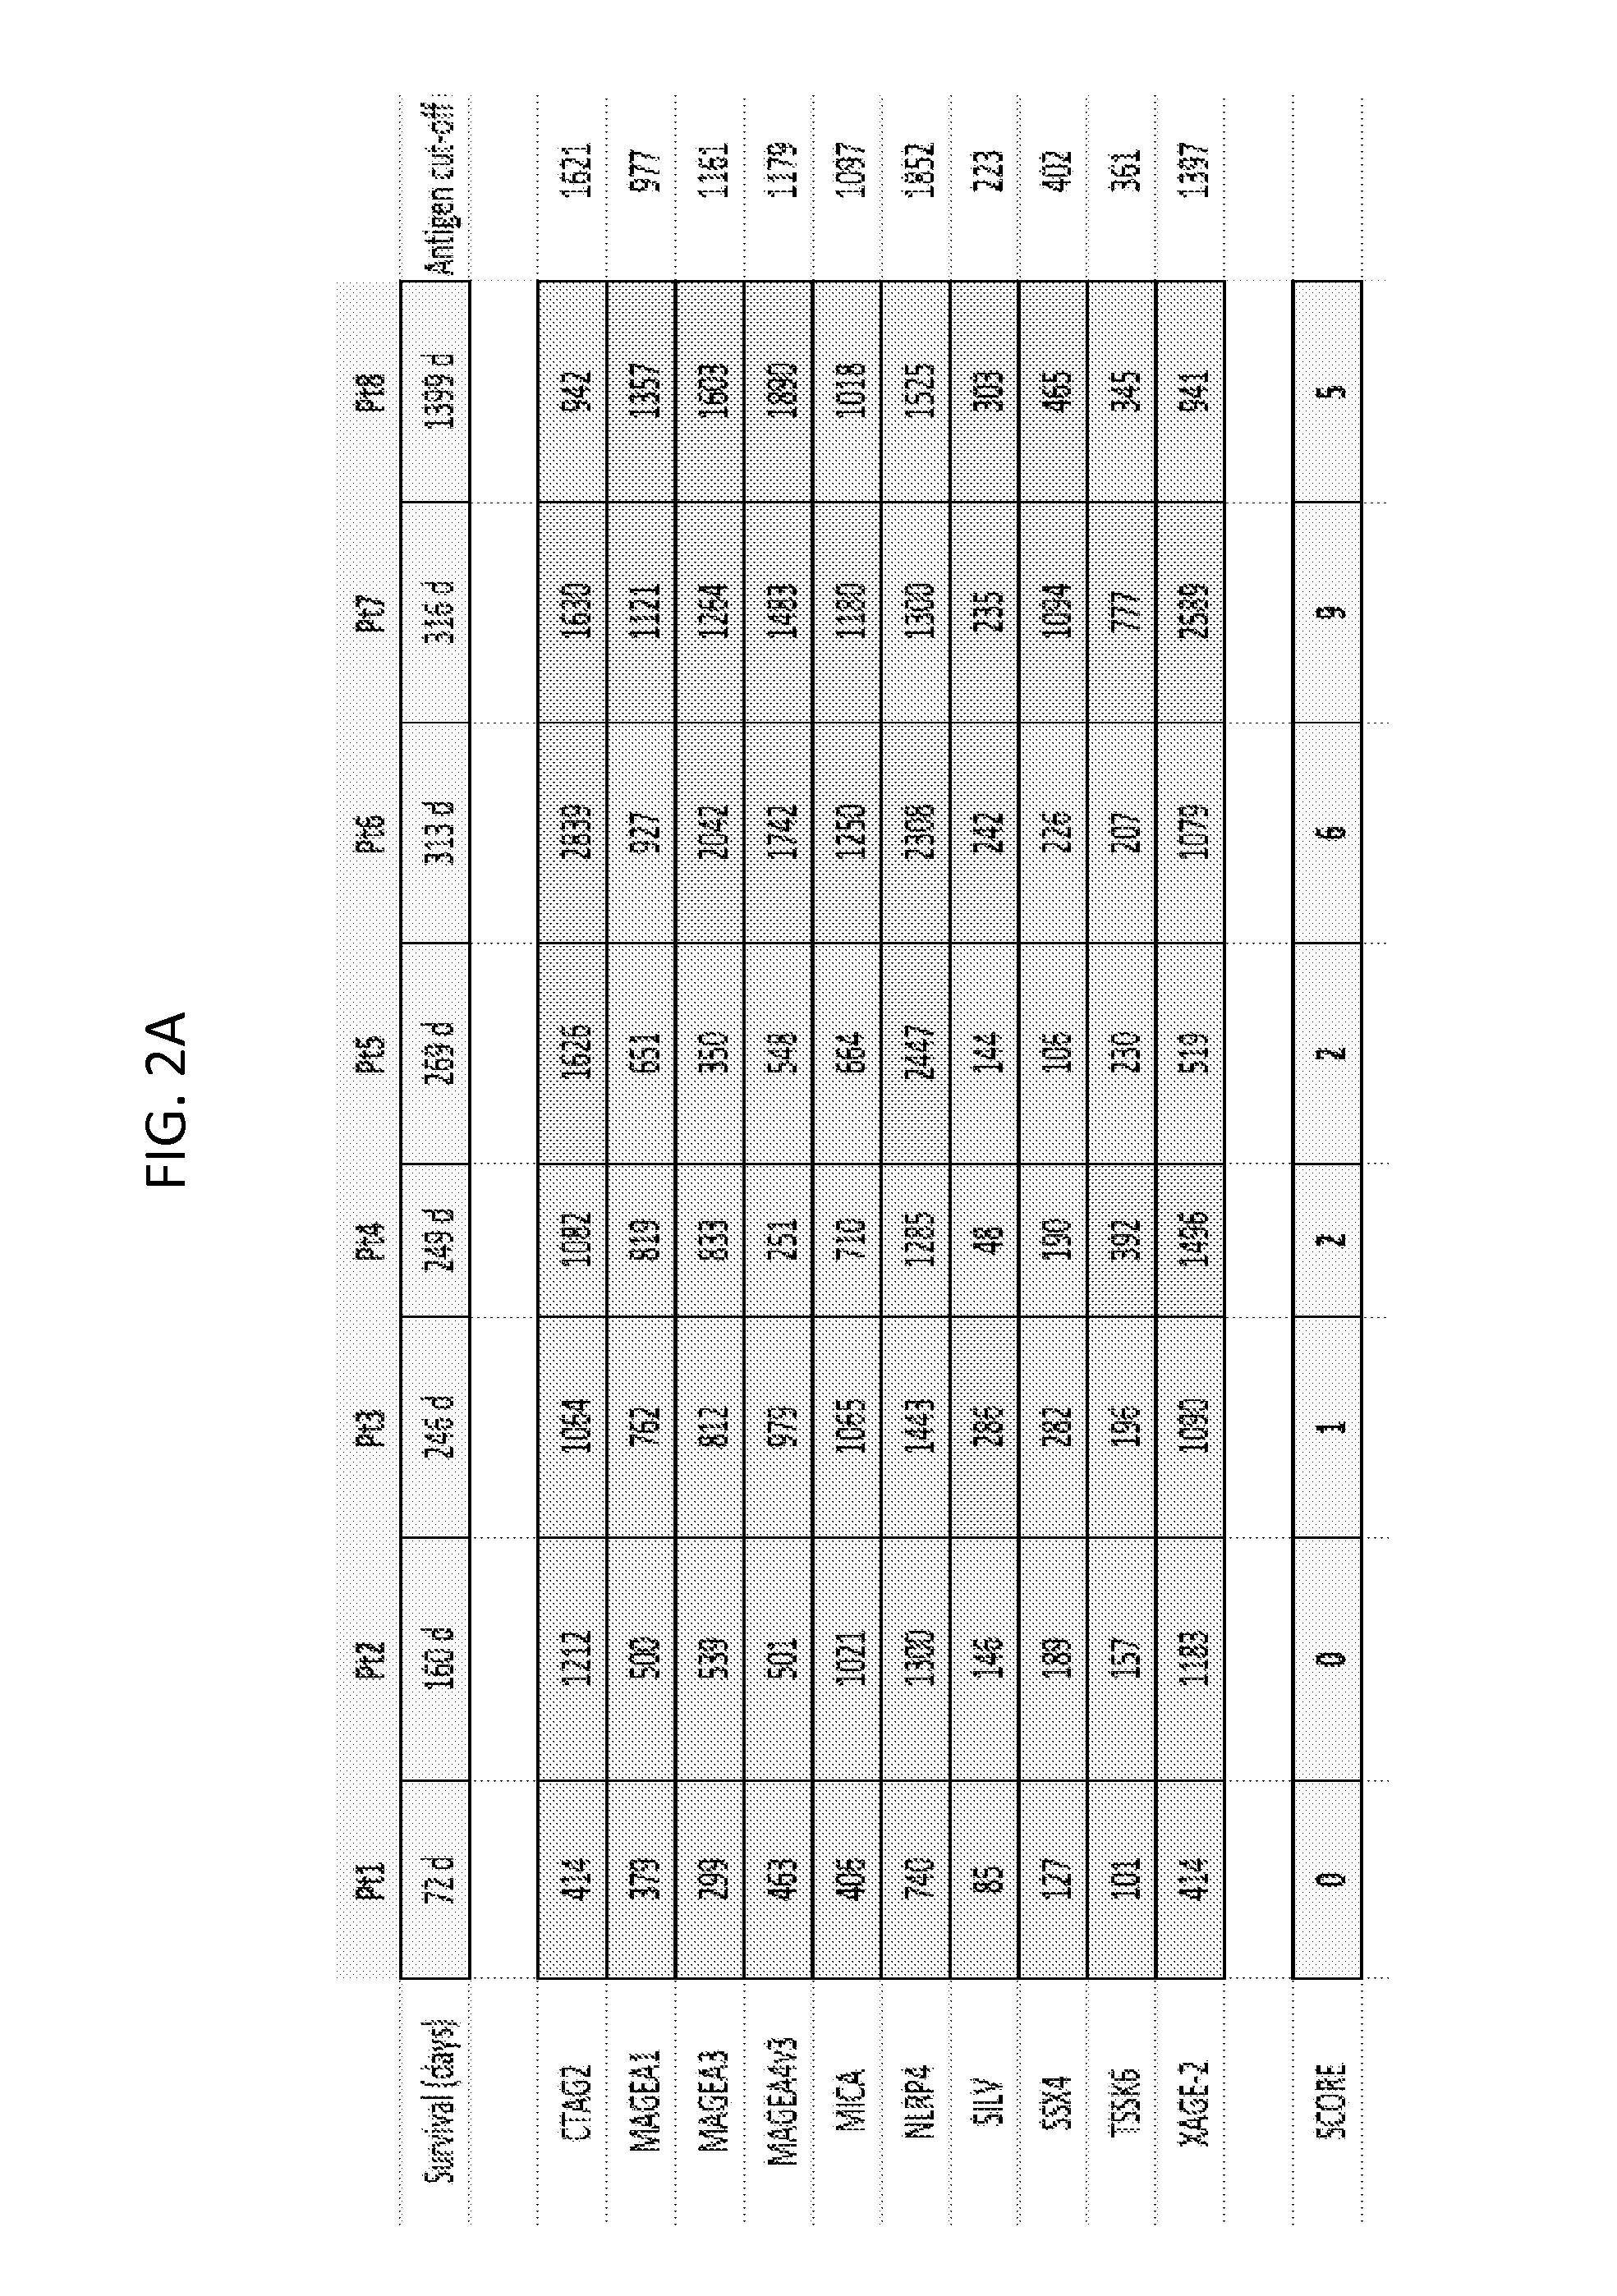 Materials and methods for differential treatment of cancer